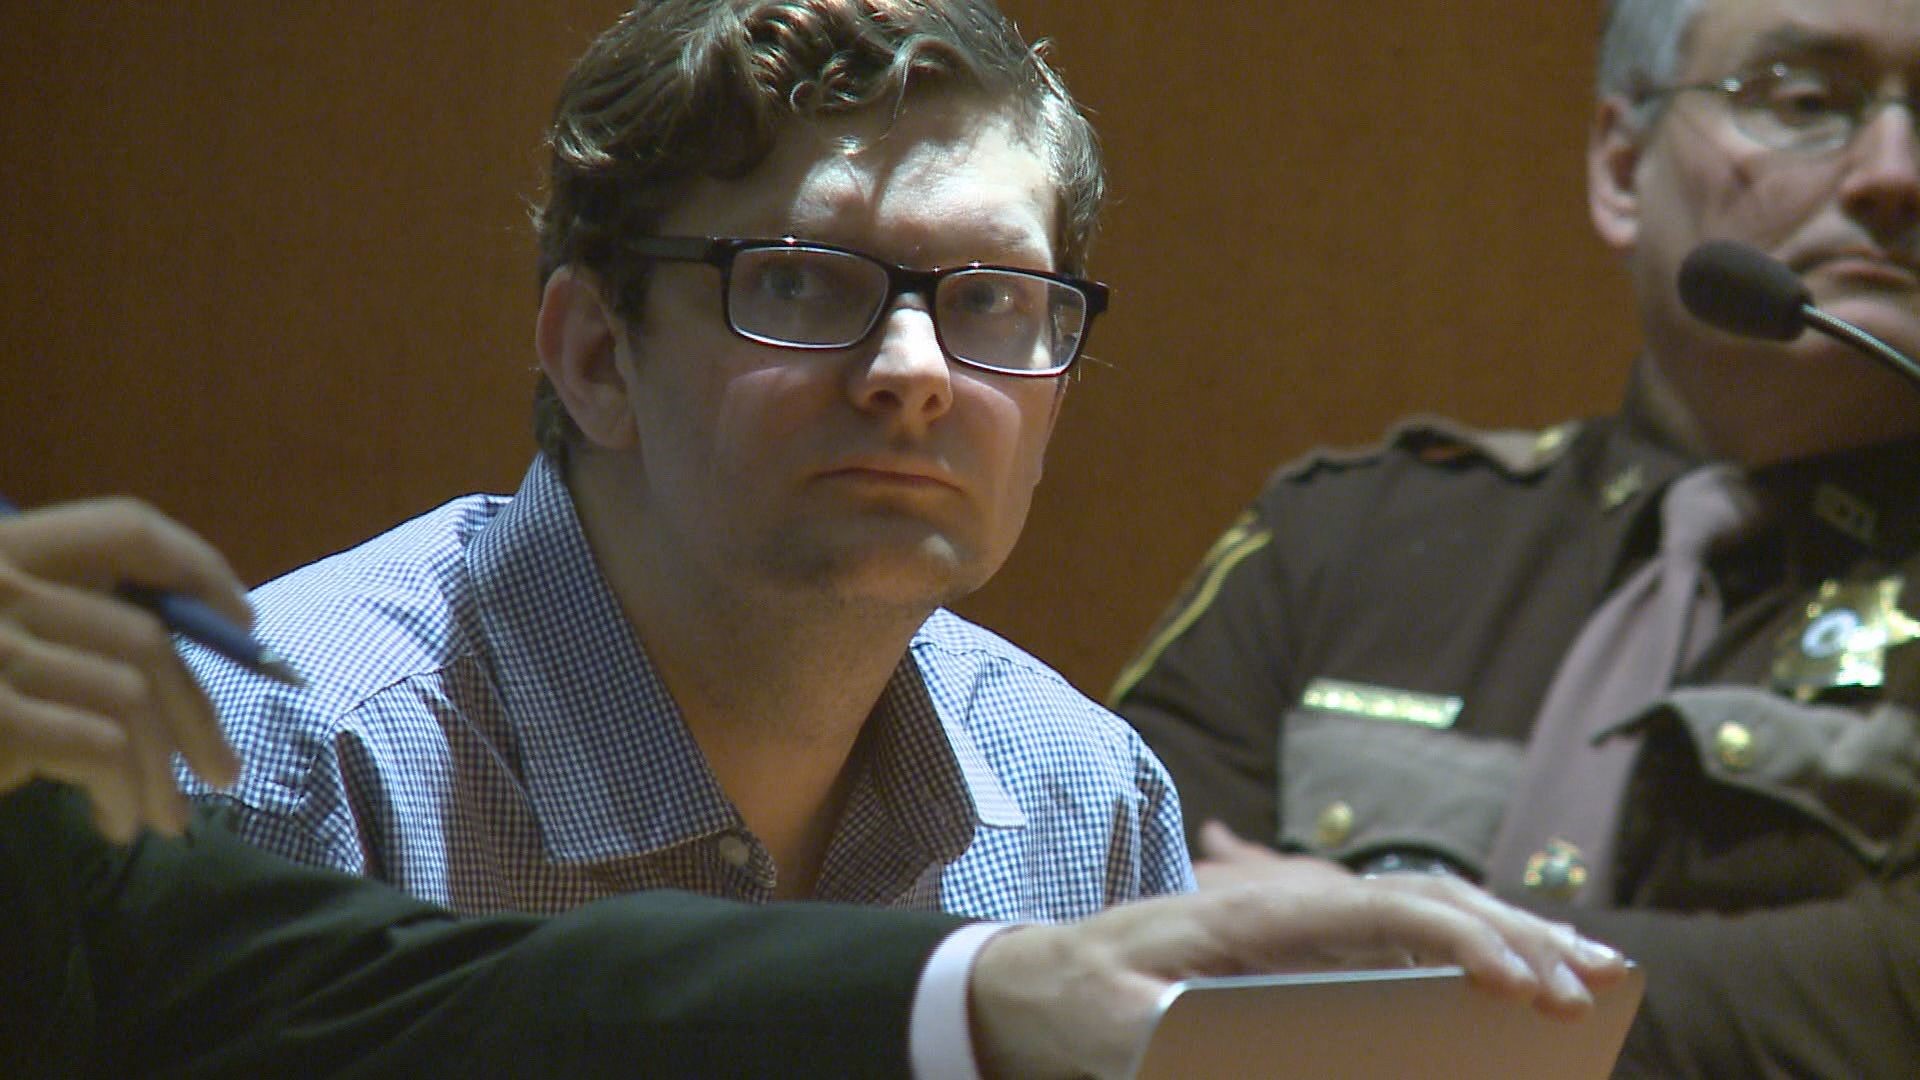 Noah Gaston's case will go before a new jury after a judge ordered a mistrial in February.